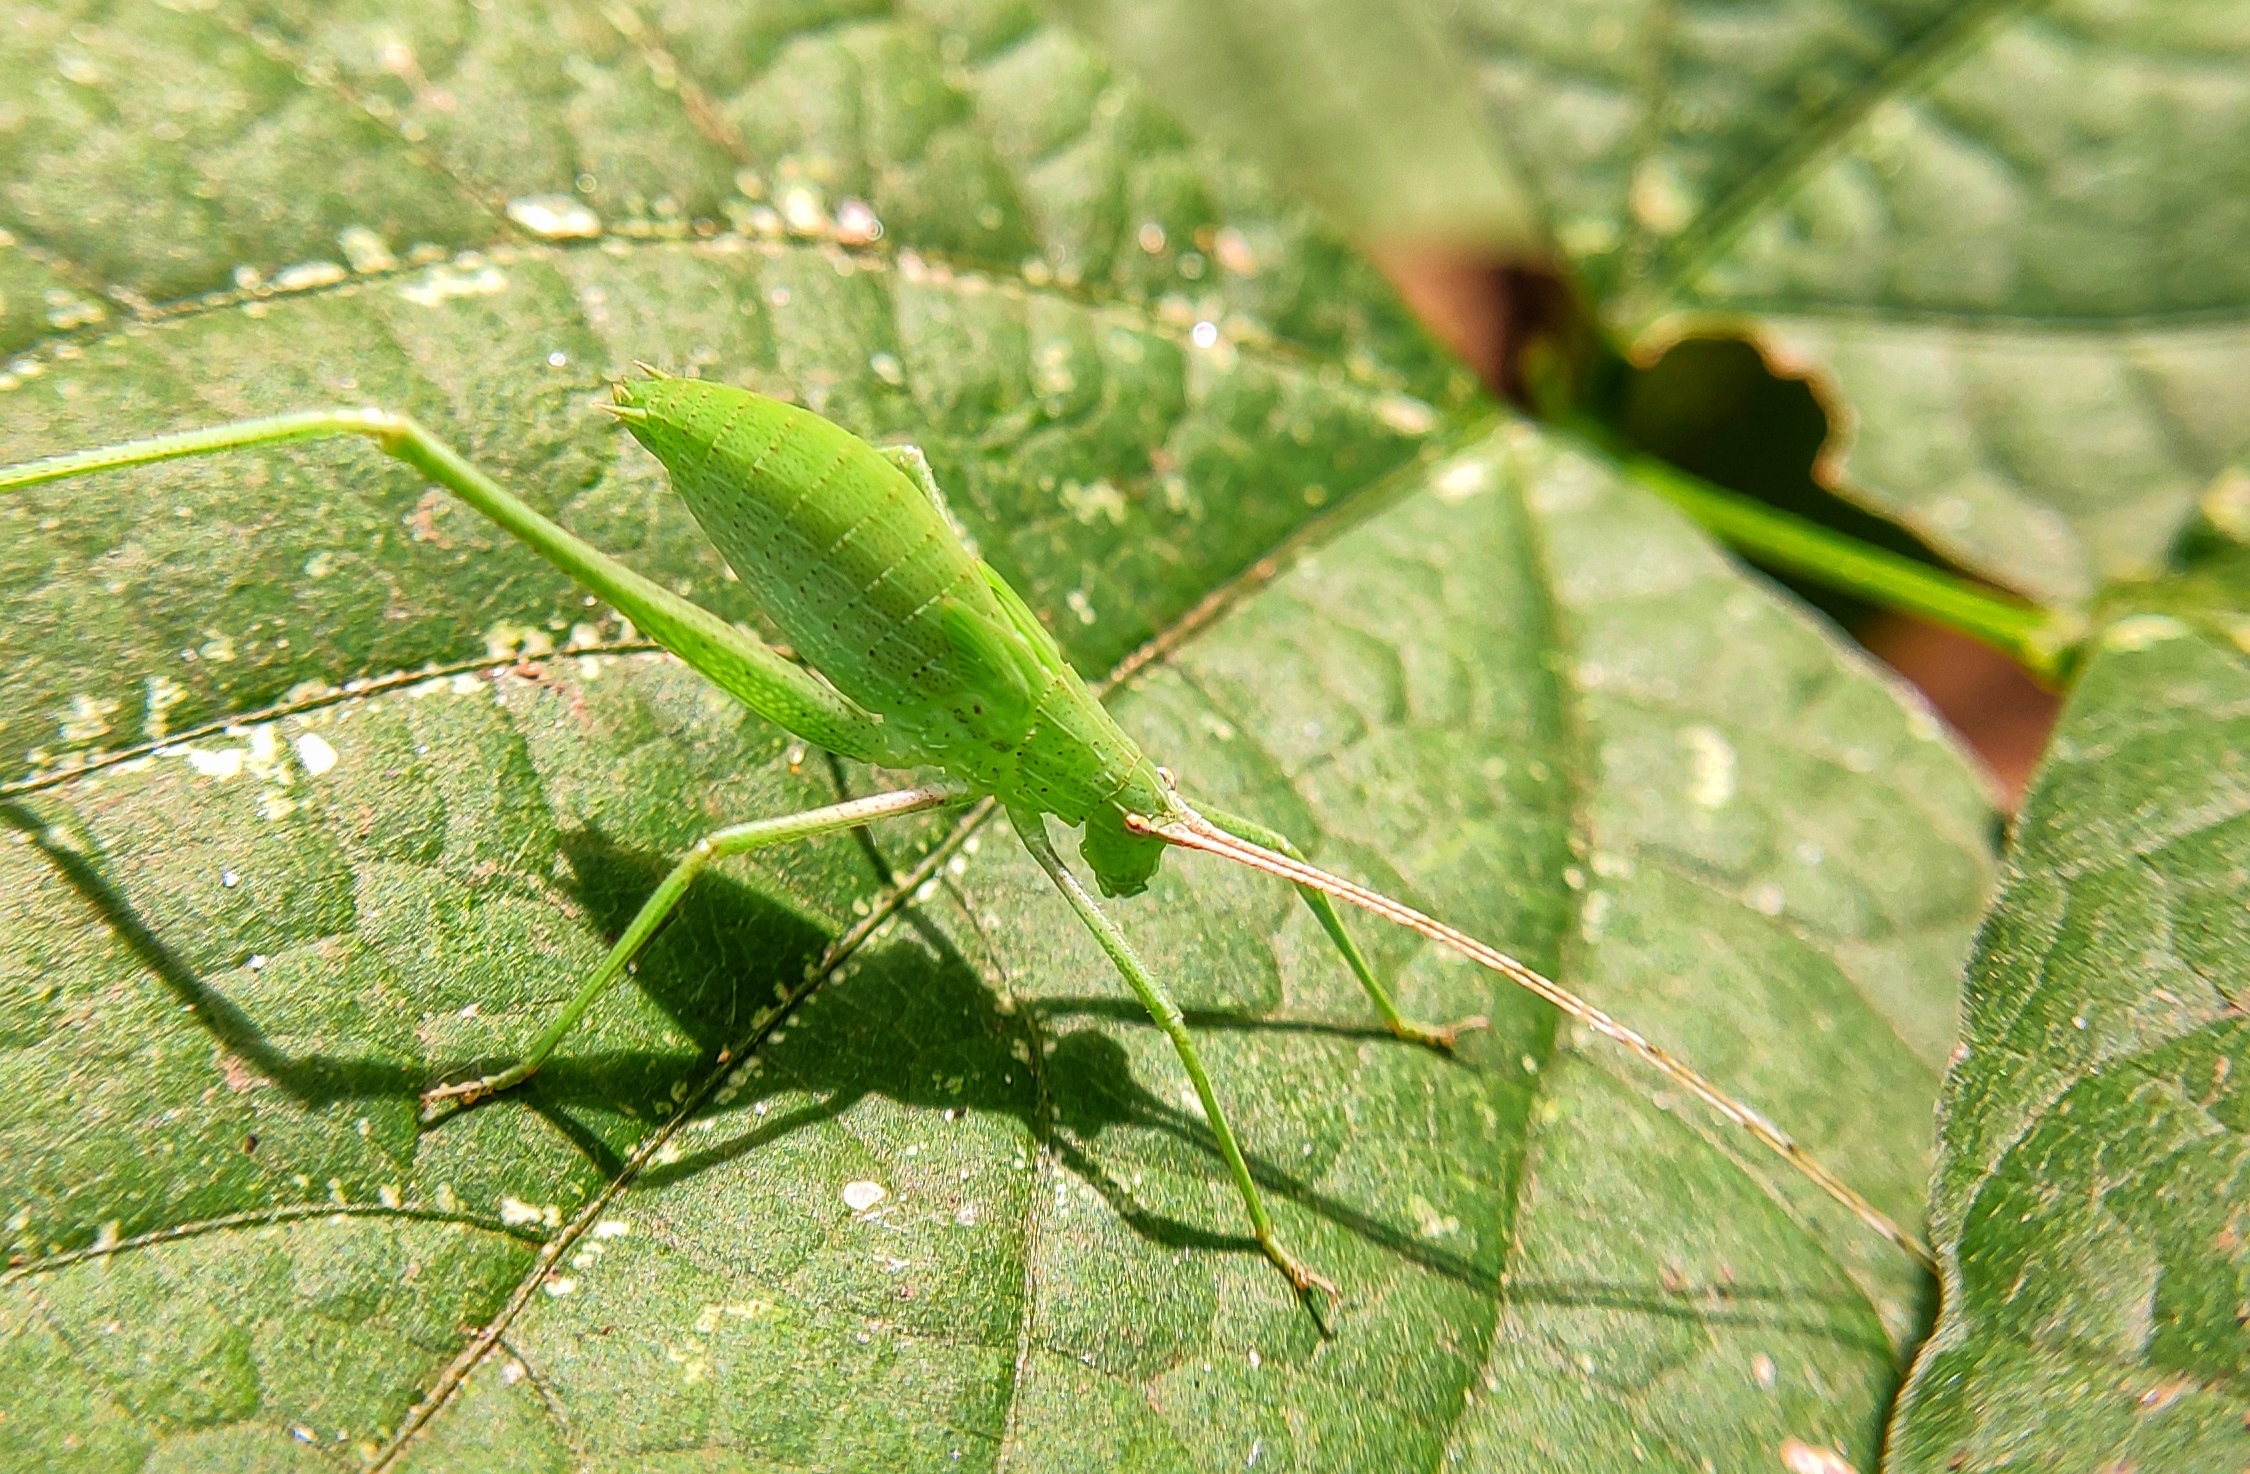 insect on a leaf